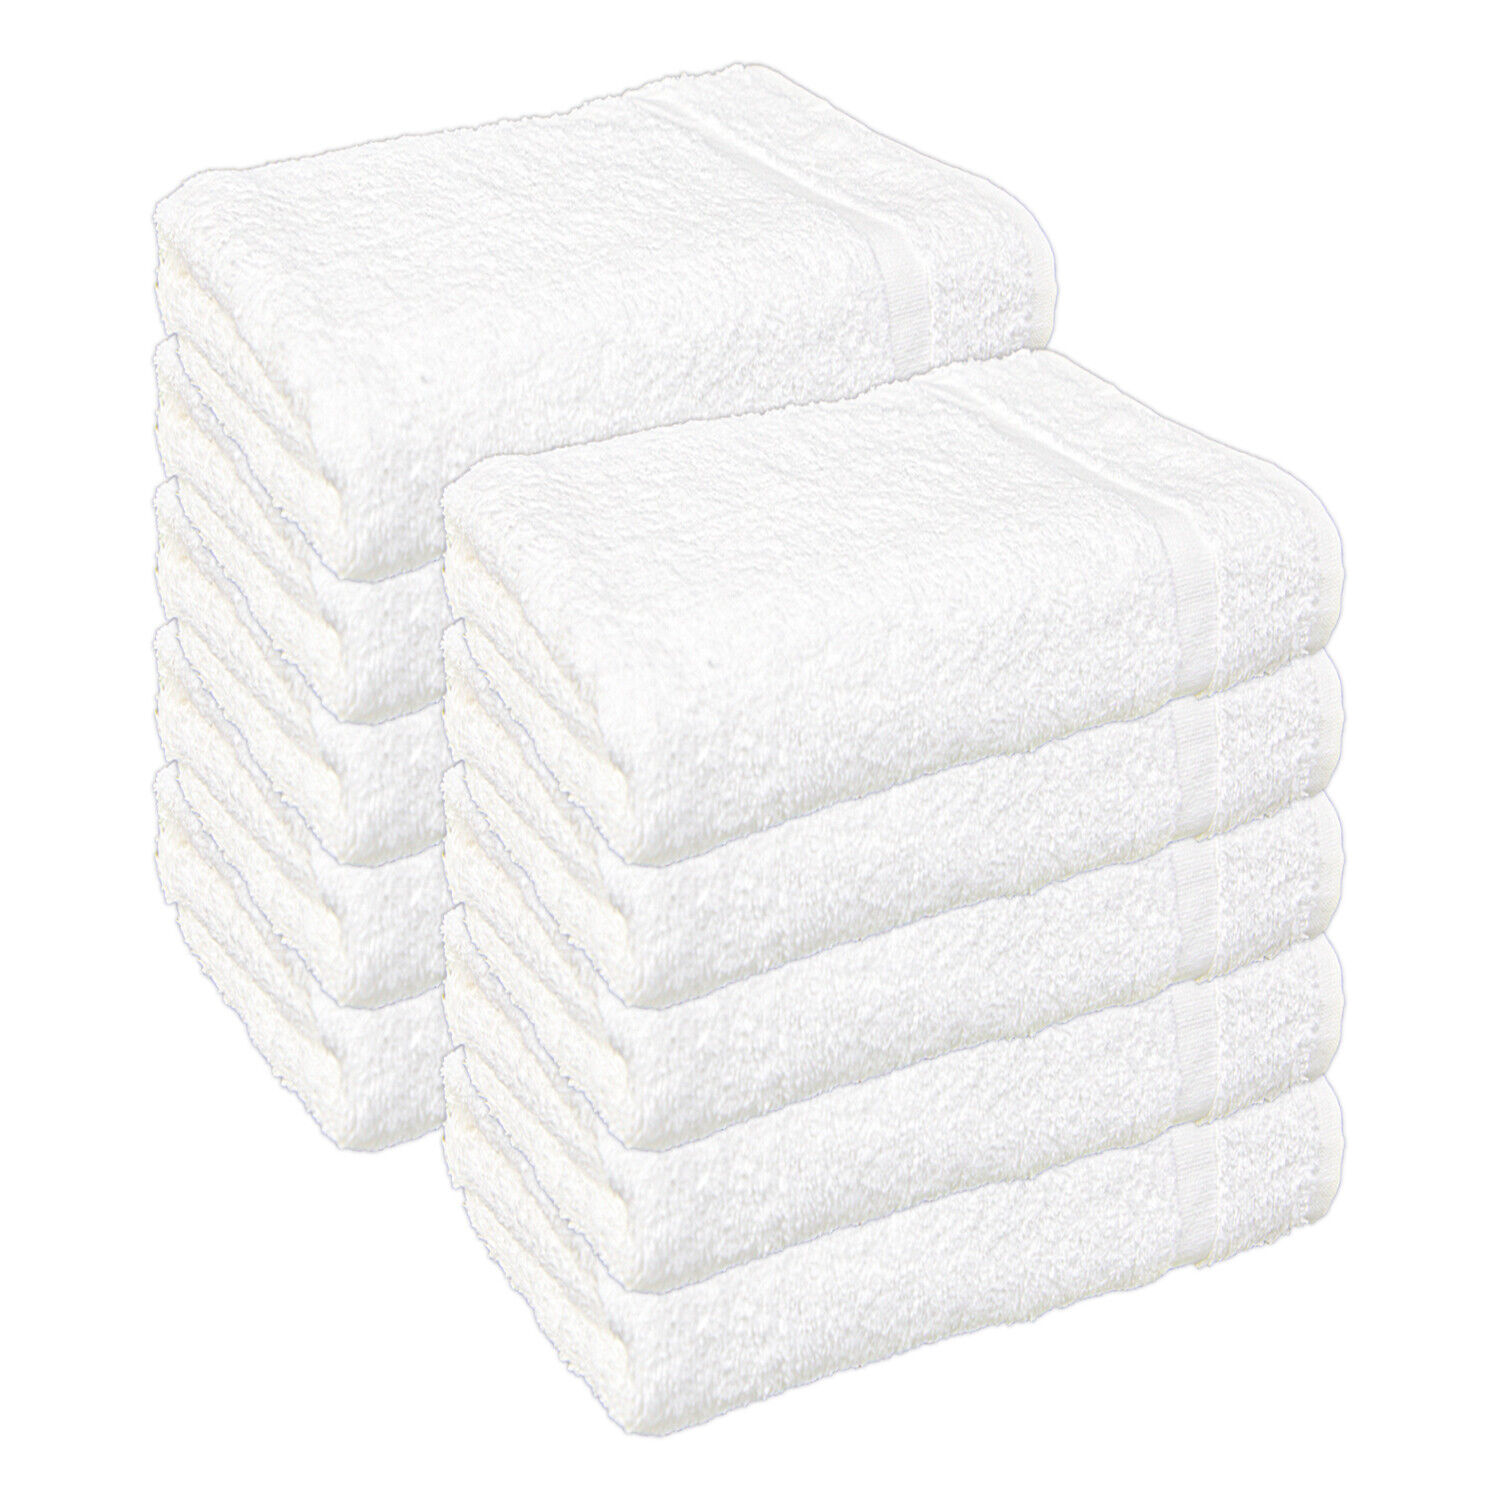 12 Pack of Admiral Bath Towels - White - 24 x 48 - Bulk Bathroom Cotton Towels  Arkwright Does Not Apply